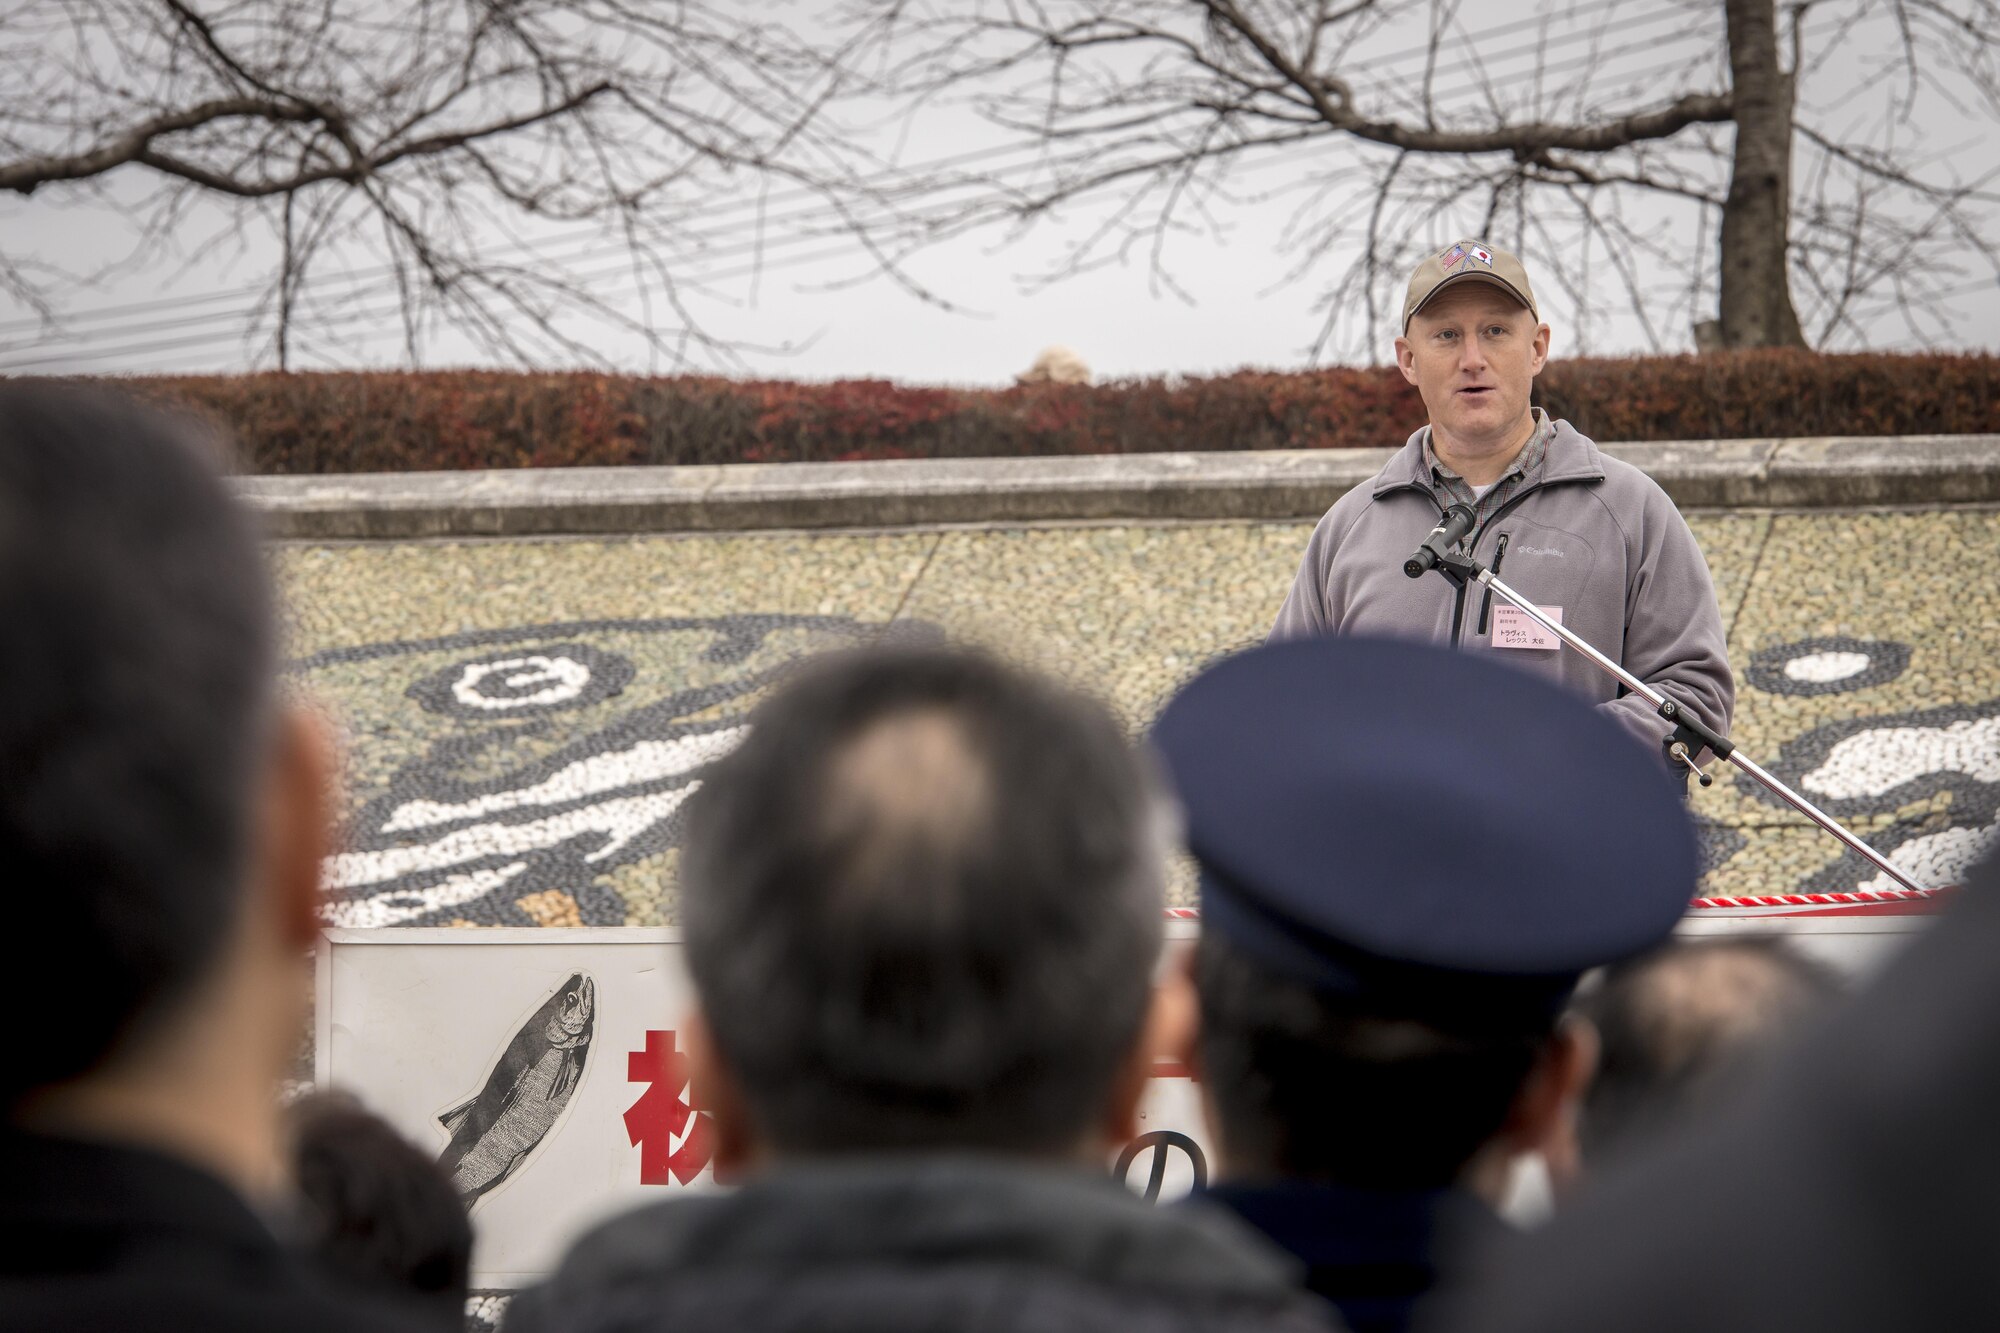 U.S. Air Force Col. Travis Rex, the 35th Fighter Wing vice commander, addresses attendees to the 11th Annual Salmon Festival in Oirase, Japan, during the opening ceremony Nov. 19, 2016. The annual event attracts Japanese and Americans alike from hundreds of miles away and is known regionally as the largest salmon festival in Northern Japan. Every year, a Misawa Air Base commander speaks at the event as an opportunity to thank the Japanese community for their ongoing support of U.S. operations in the region. (U.S. Air Force photo by Staff Sgt. Benjamin W. Stratton)